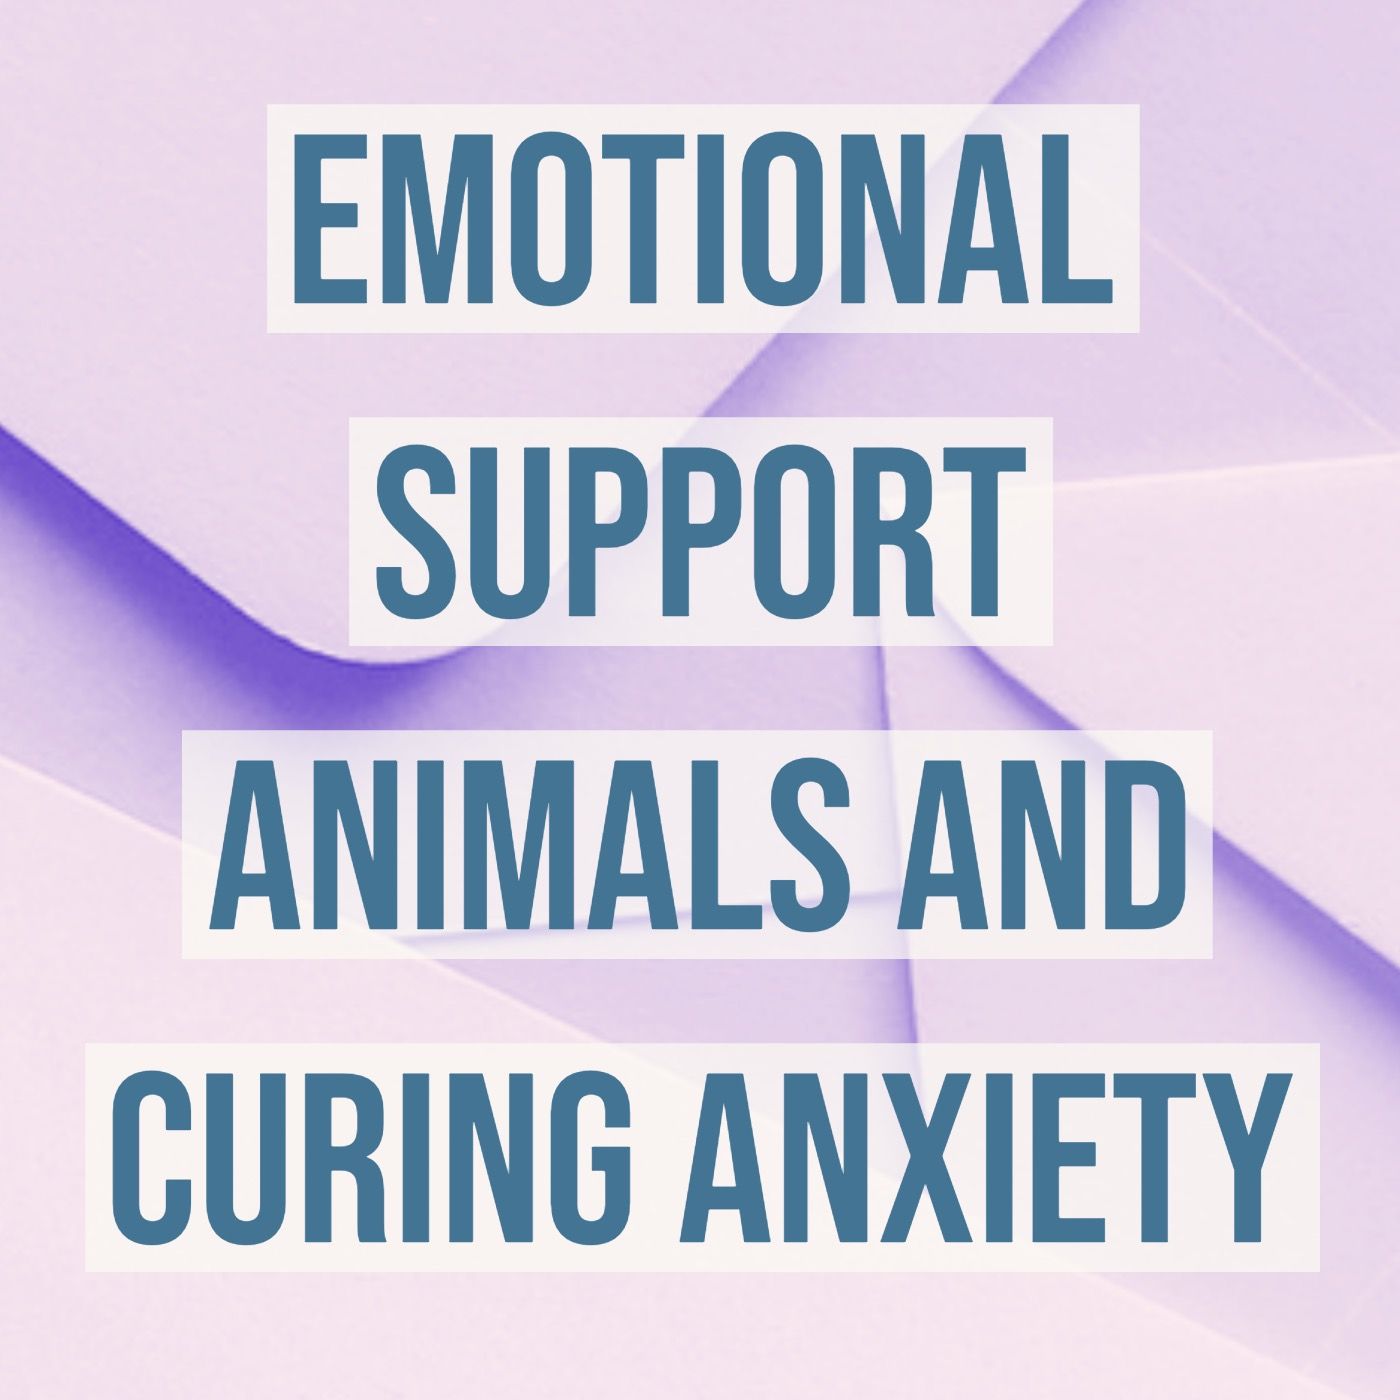 Emotional Support Animals and Curing Anxiety